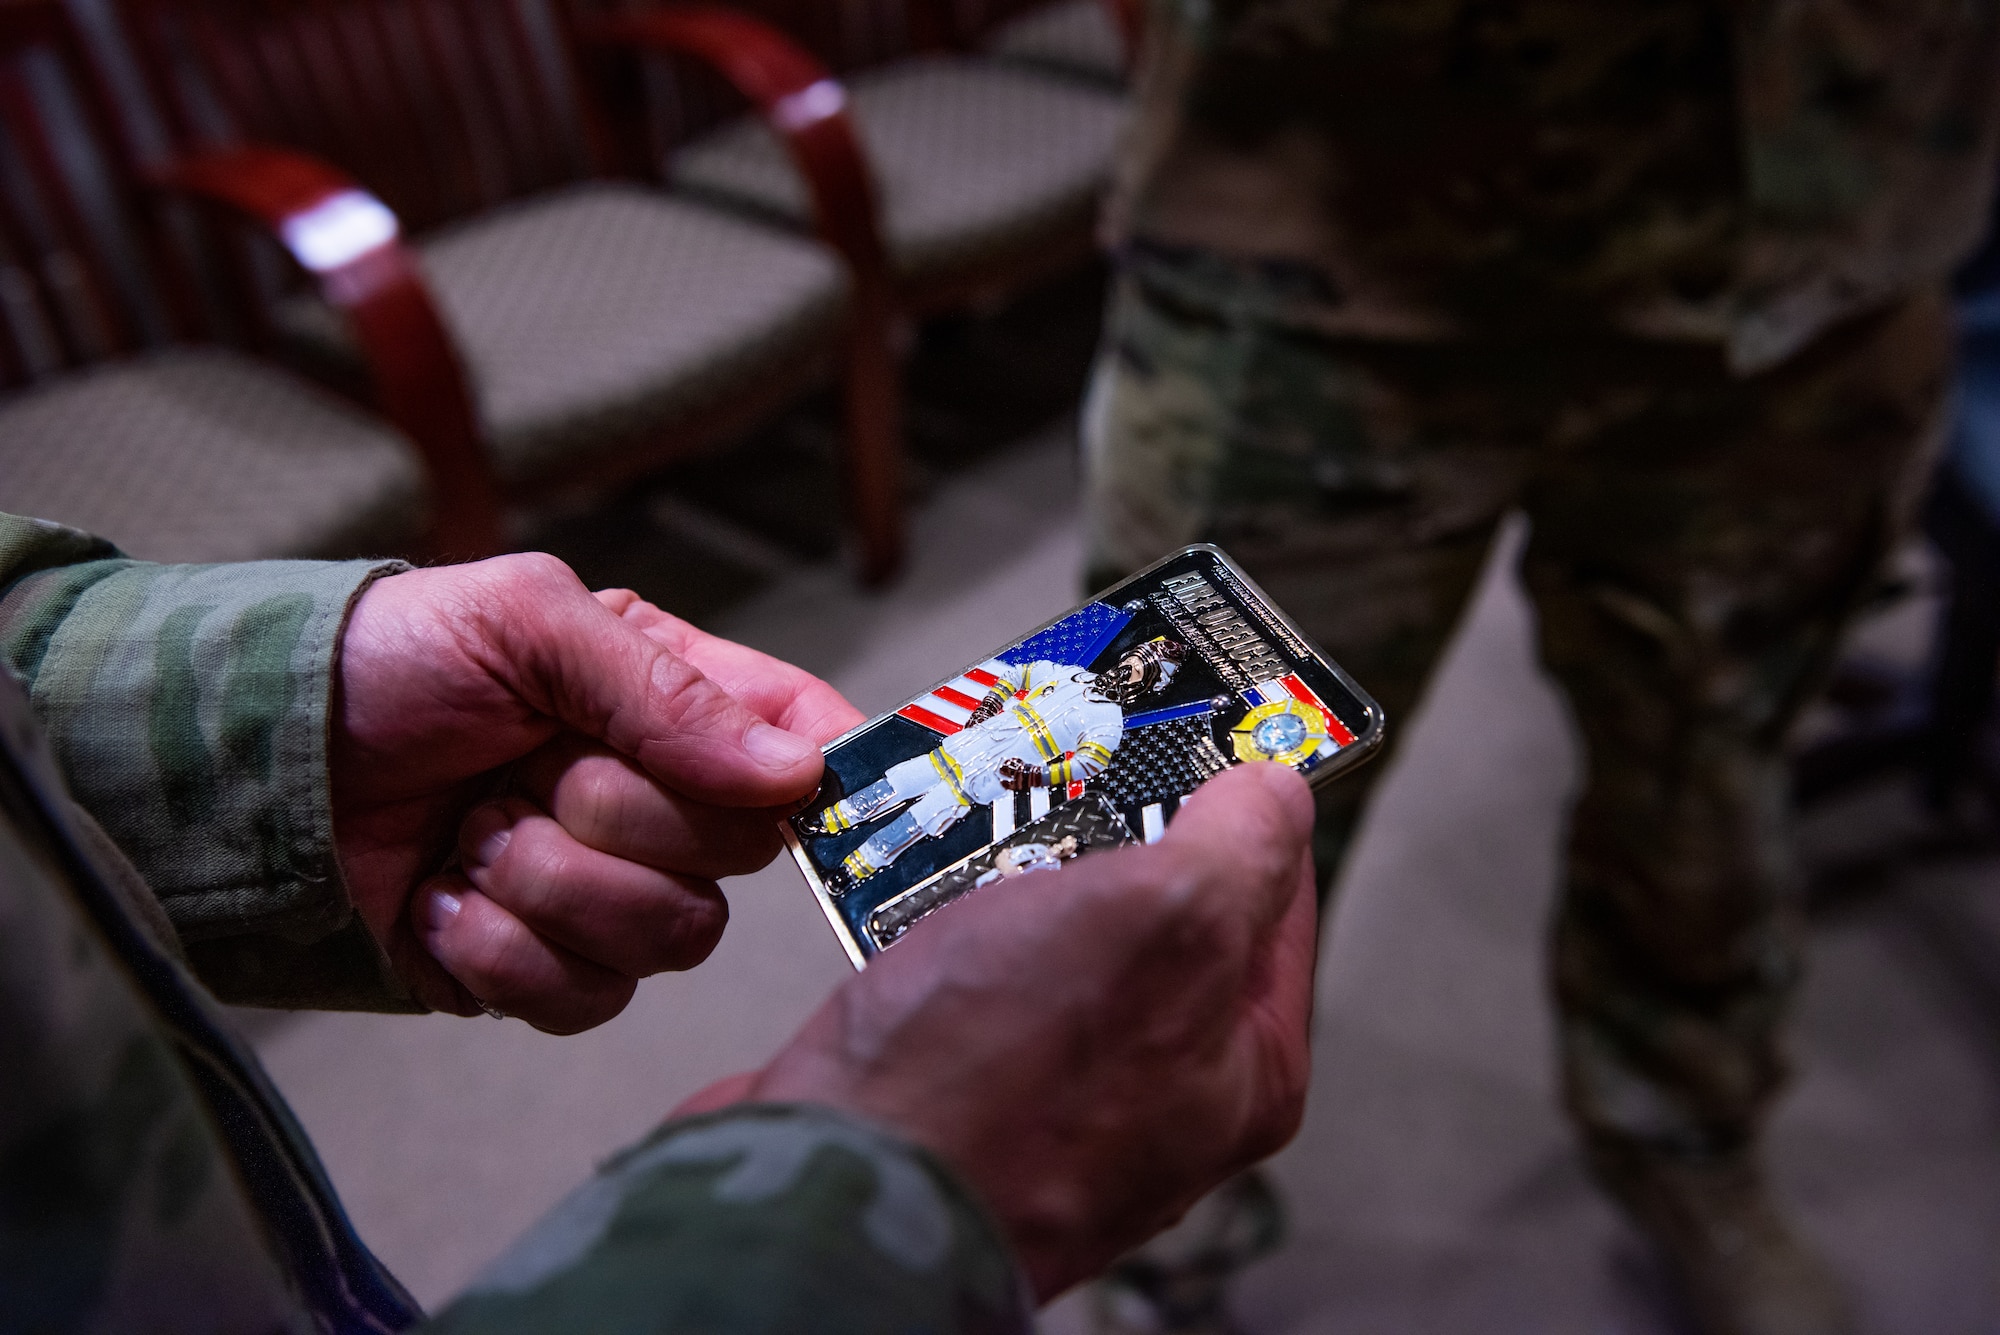 Chief Master Sergeant of the Space Force Roger A. Towberman inspects a coin he received from the 312th Training Squadron , at Goodfellow Air Force Base, Texas, July 8, 2022. The 312th TRS trains all Department of Defense and allied forces fire protection professionals. (U.S. Air Force photo by Senior Airman Michael Bowman)